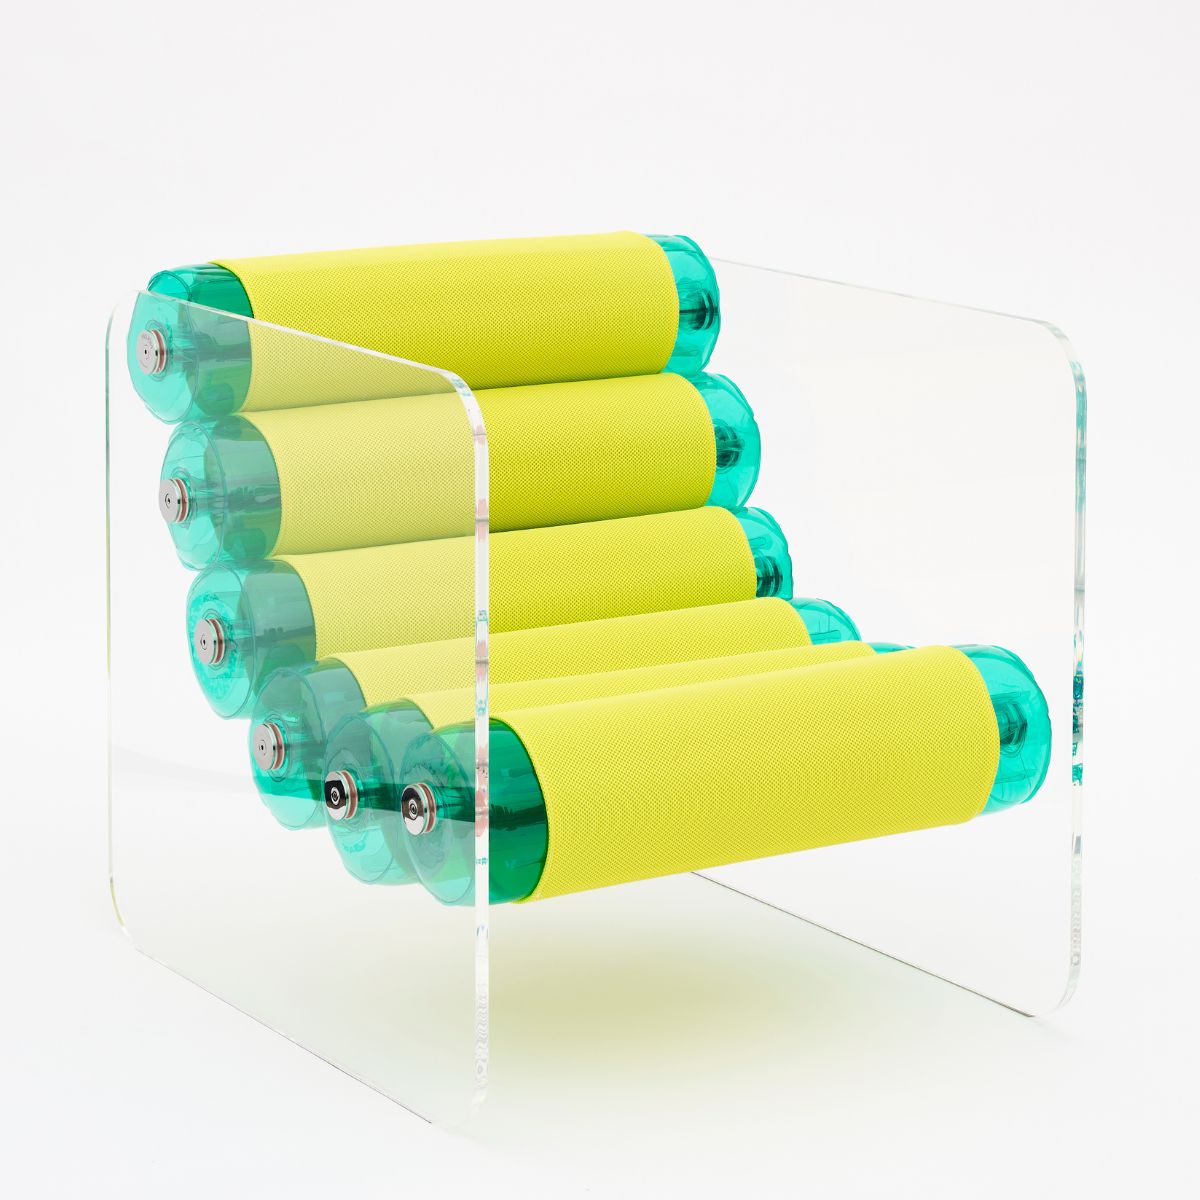 MW02 - Armchair with PMMA structure, green and yellow